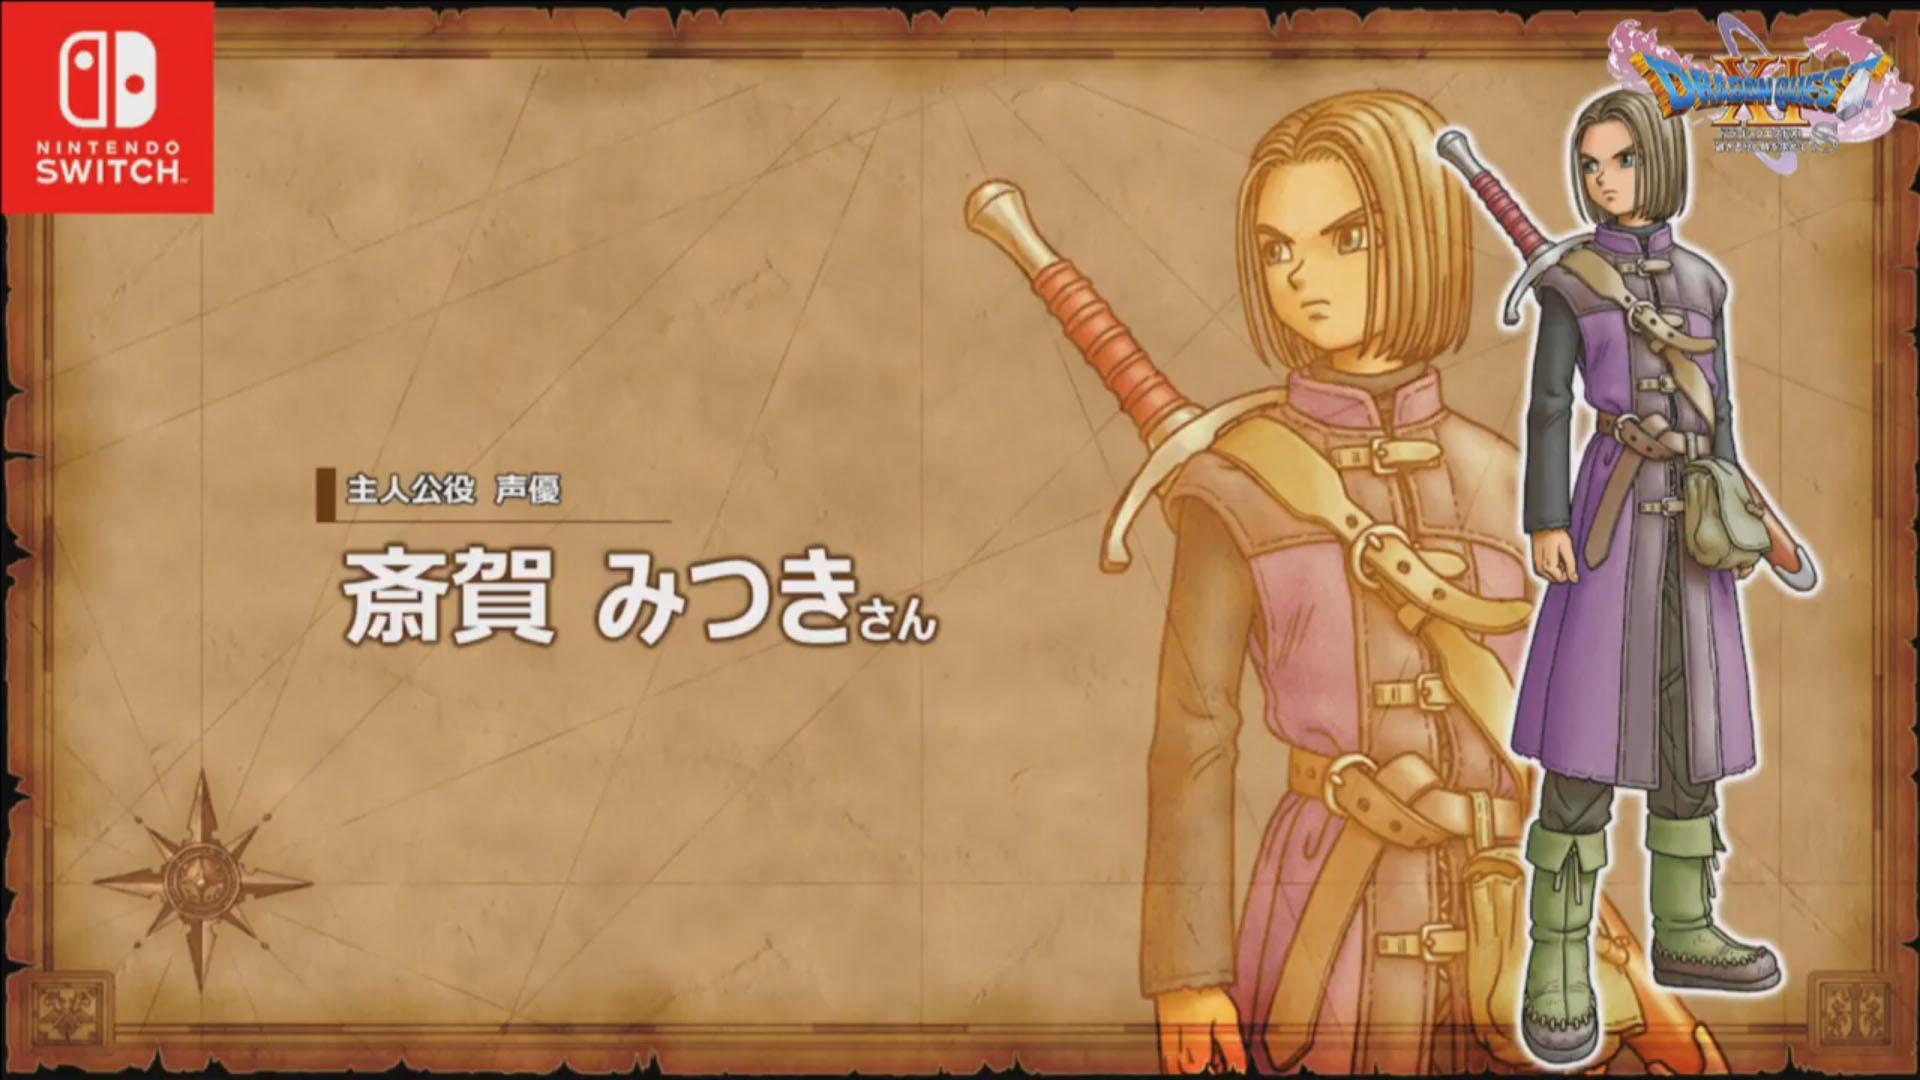 Dragon Quest XI S introduces Japanese voice actors for the protagonist, King Carnelian, Hendrik, and more